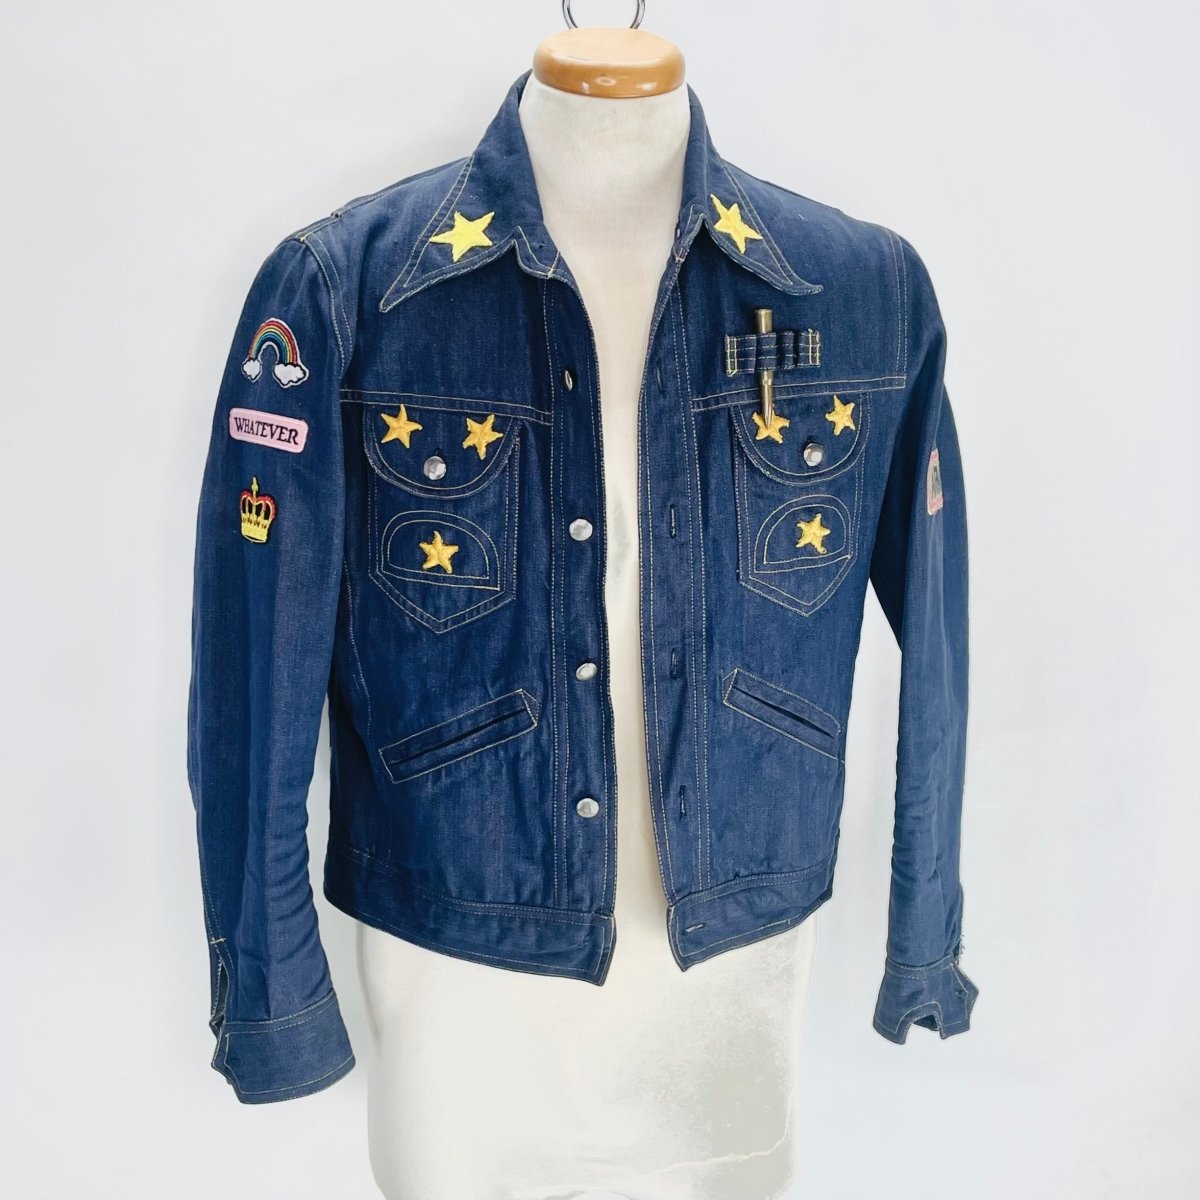 Denim Jacket with Patches - Hart & Hive